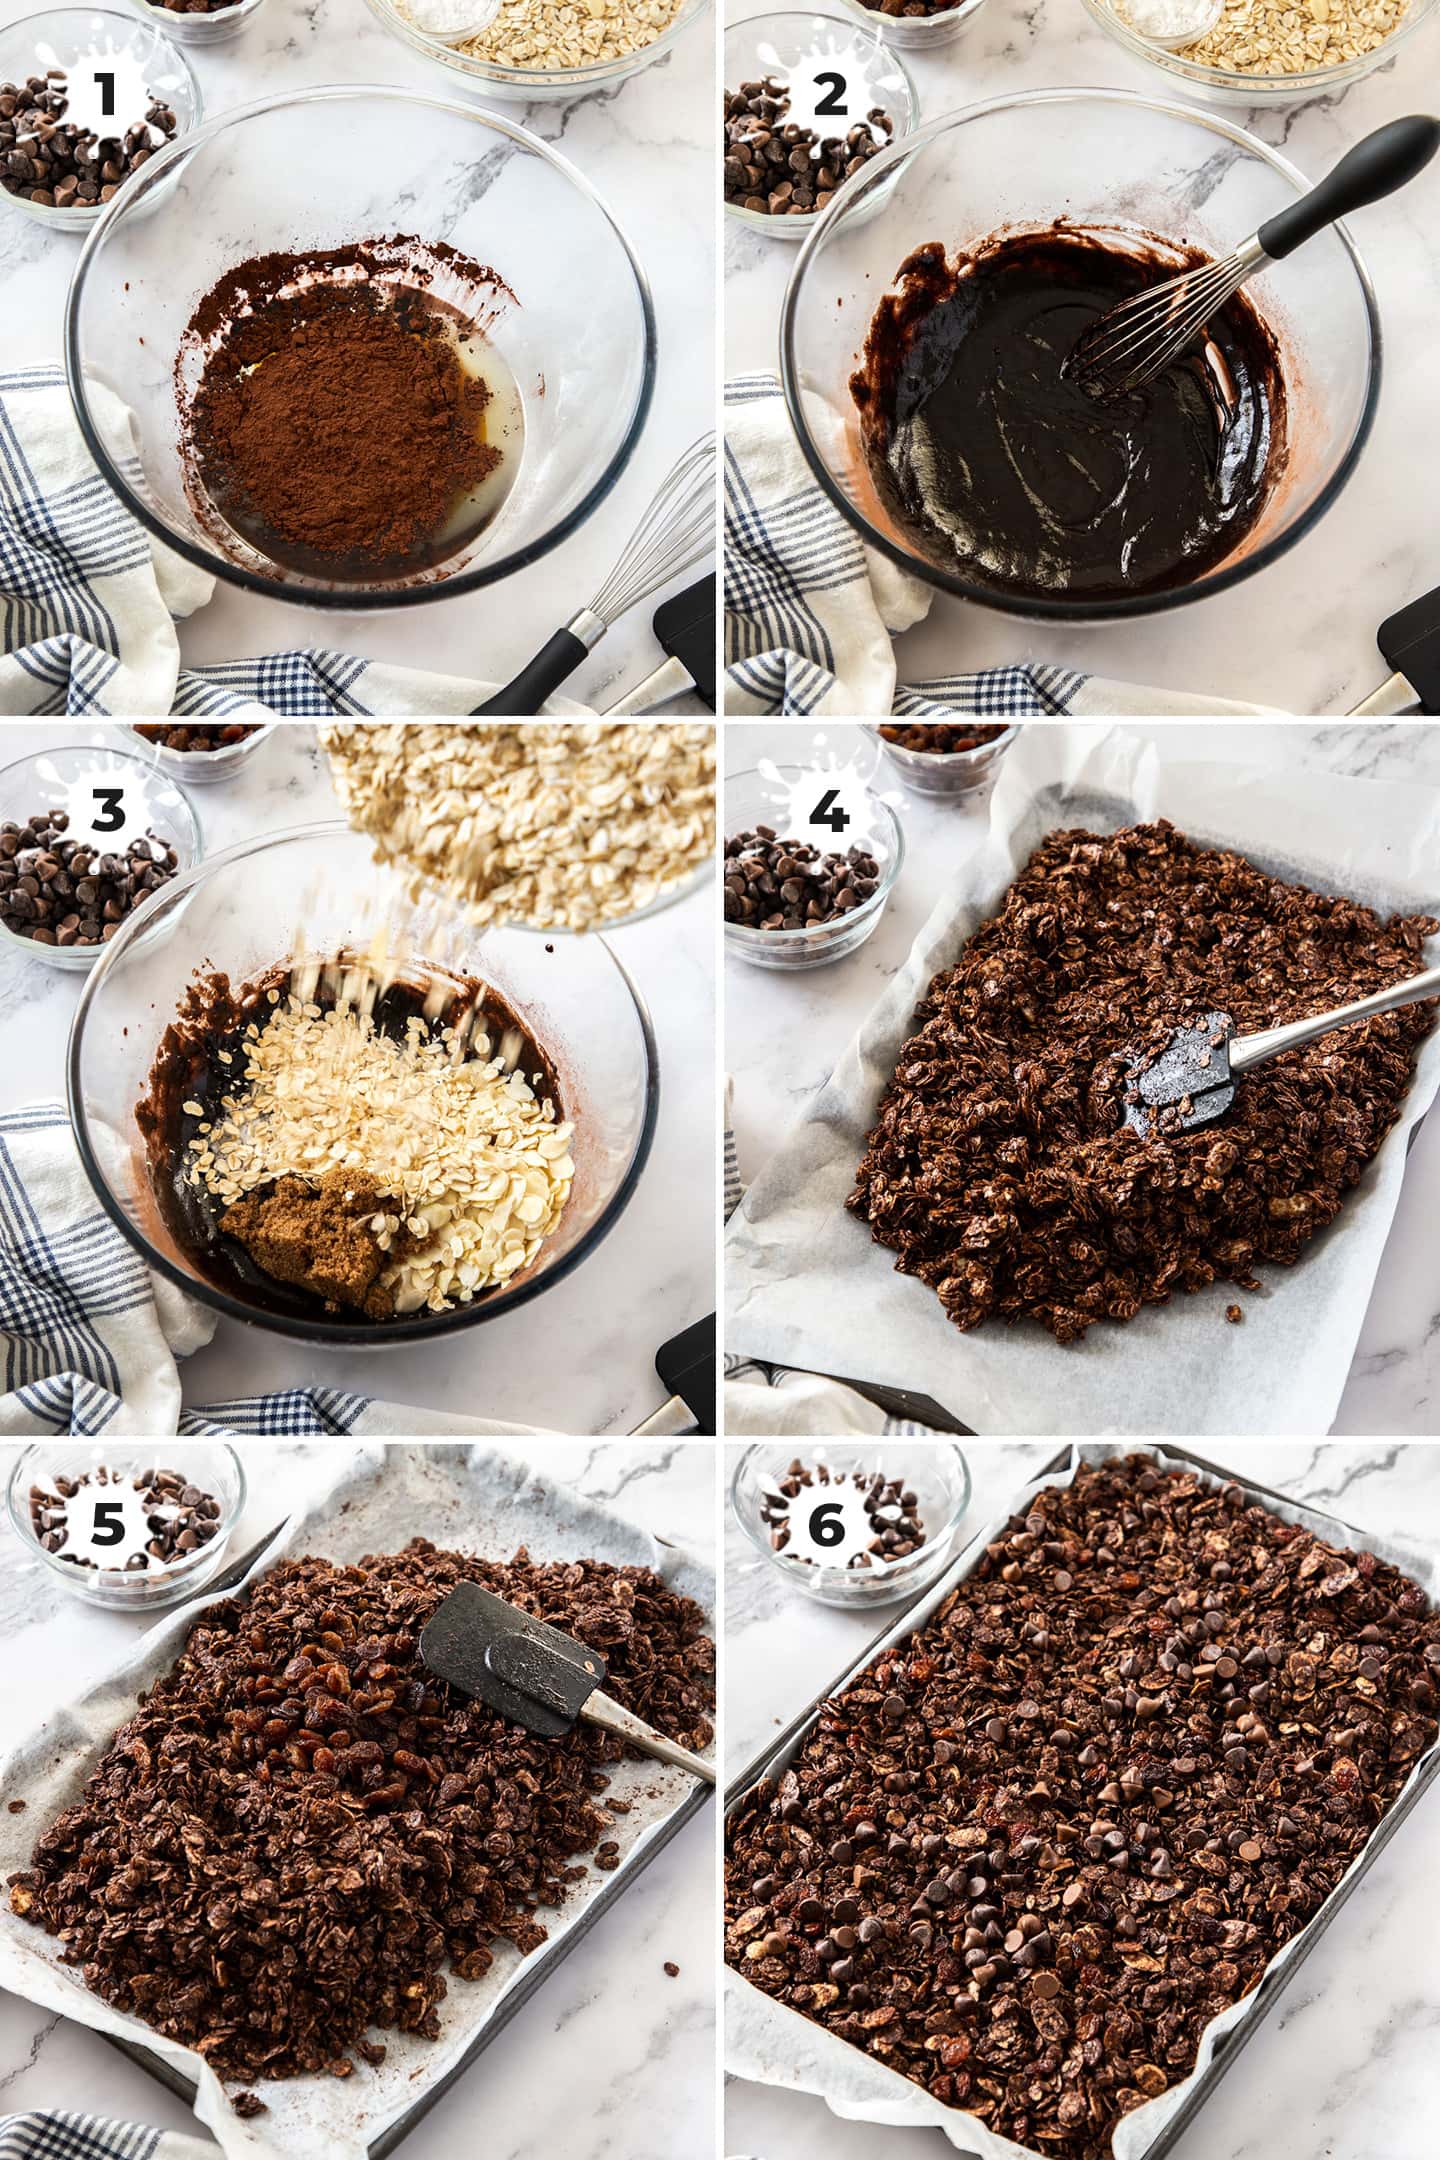 6 images showing how to make chocolate granola from scratch.